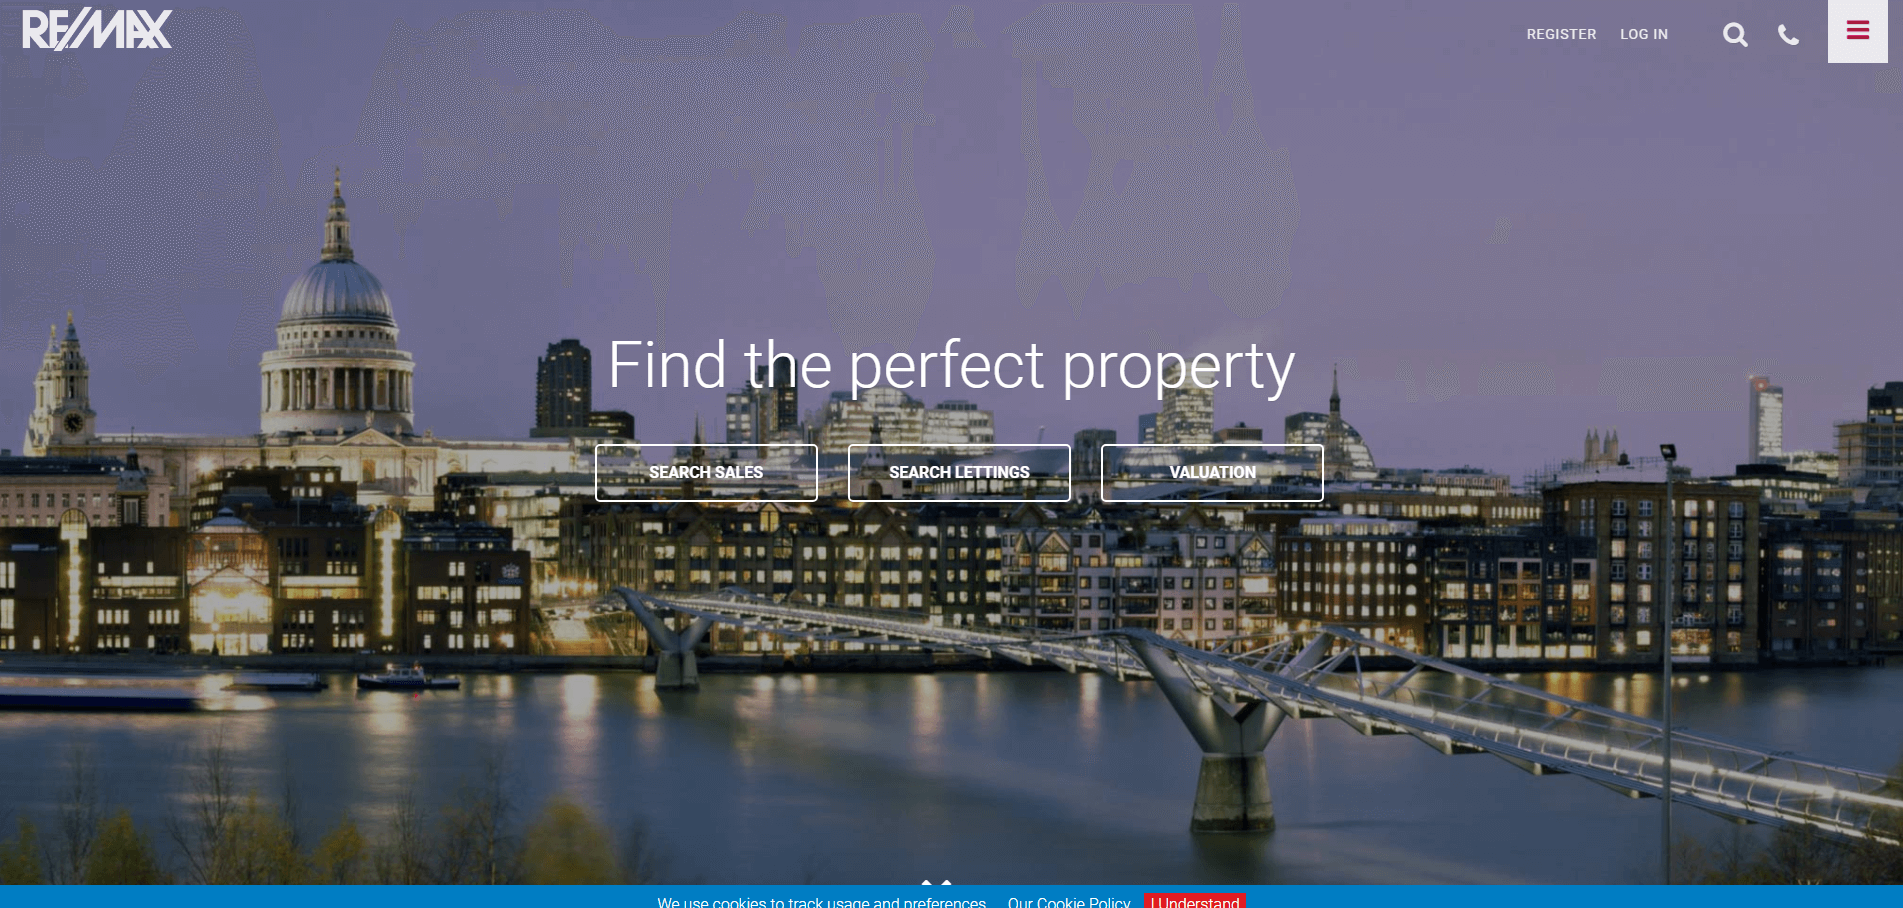  We made a list of the 101 best real estate websites.  We reviewed and ranked each site, 1-101.  Here's remax.co.uk.  Want to see who made the cut? 